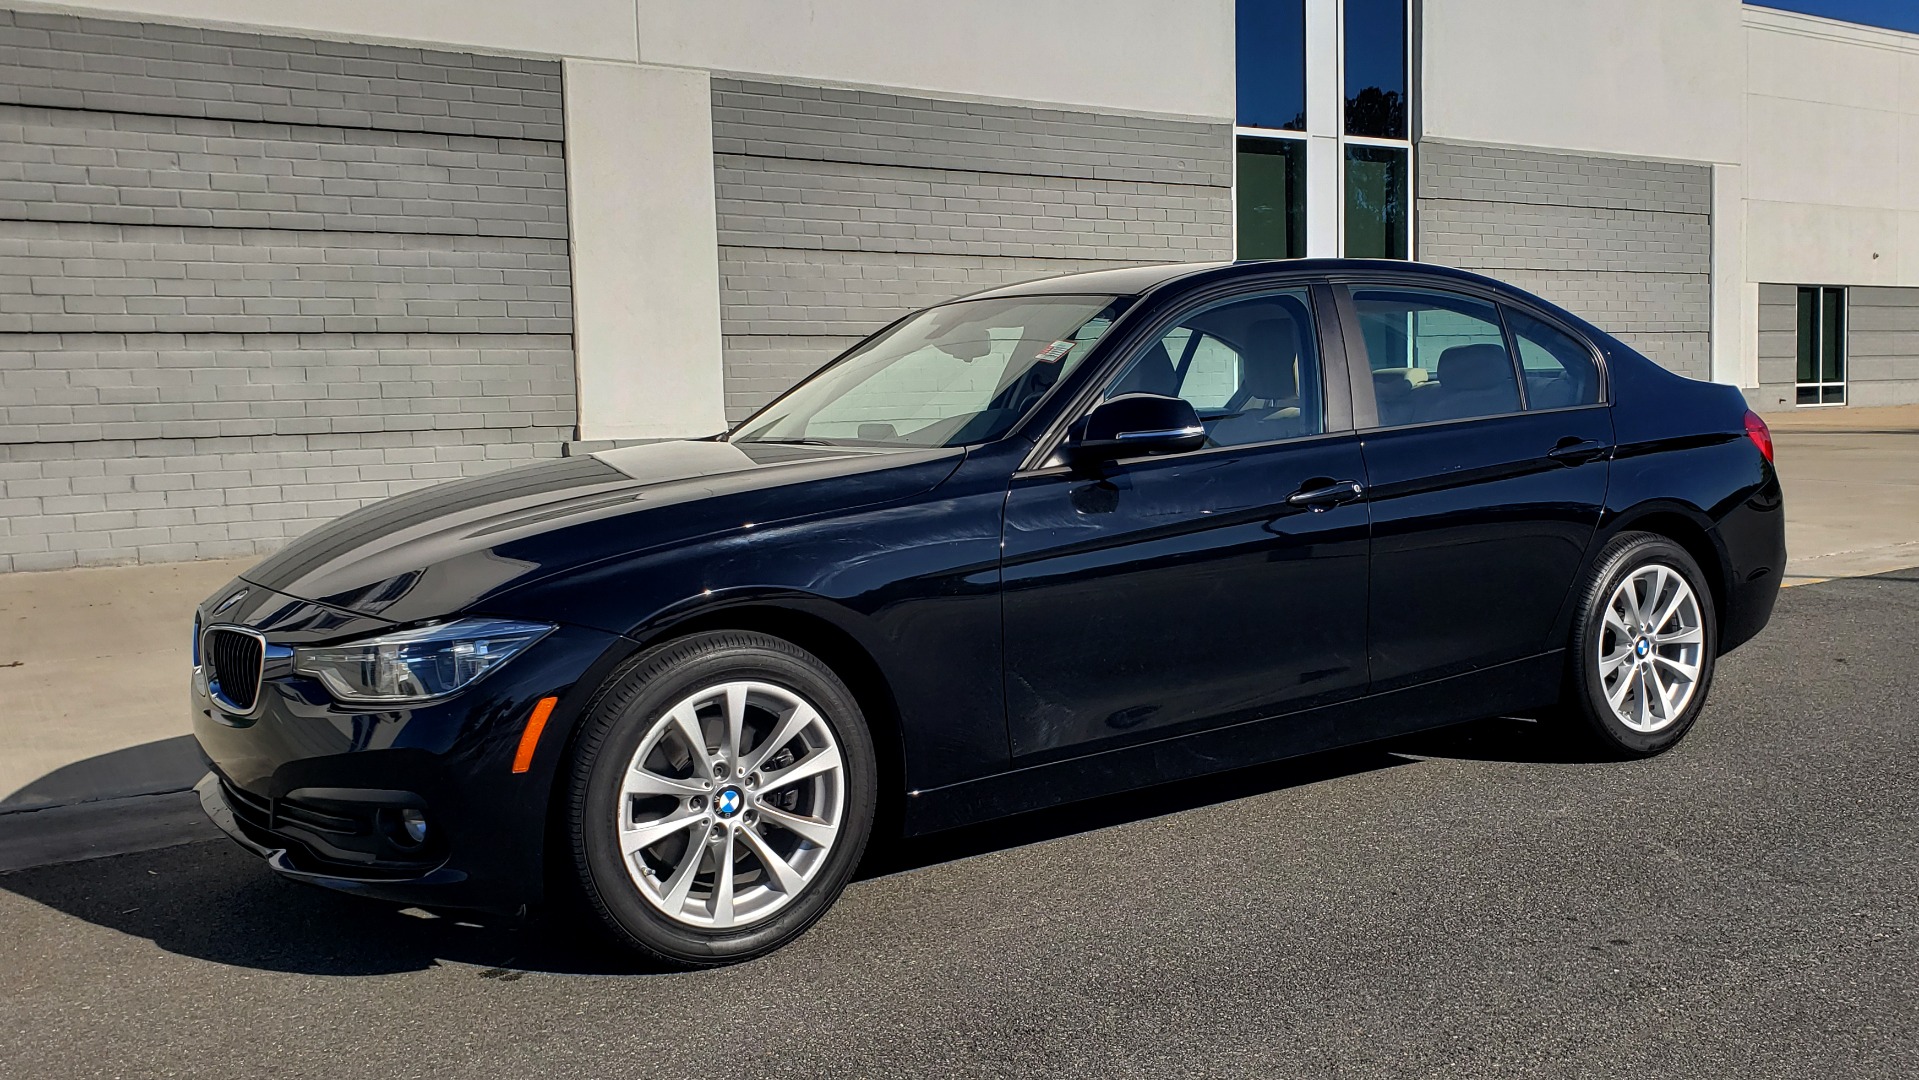 Used 2018 BMW 3 SERIES 320IXDRIVE 2.0L SEDAN / HEATED SEATS / REARVIEW for sale Sold at Formula Imports in Charlotte NC 28227 3